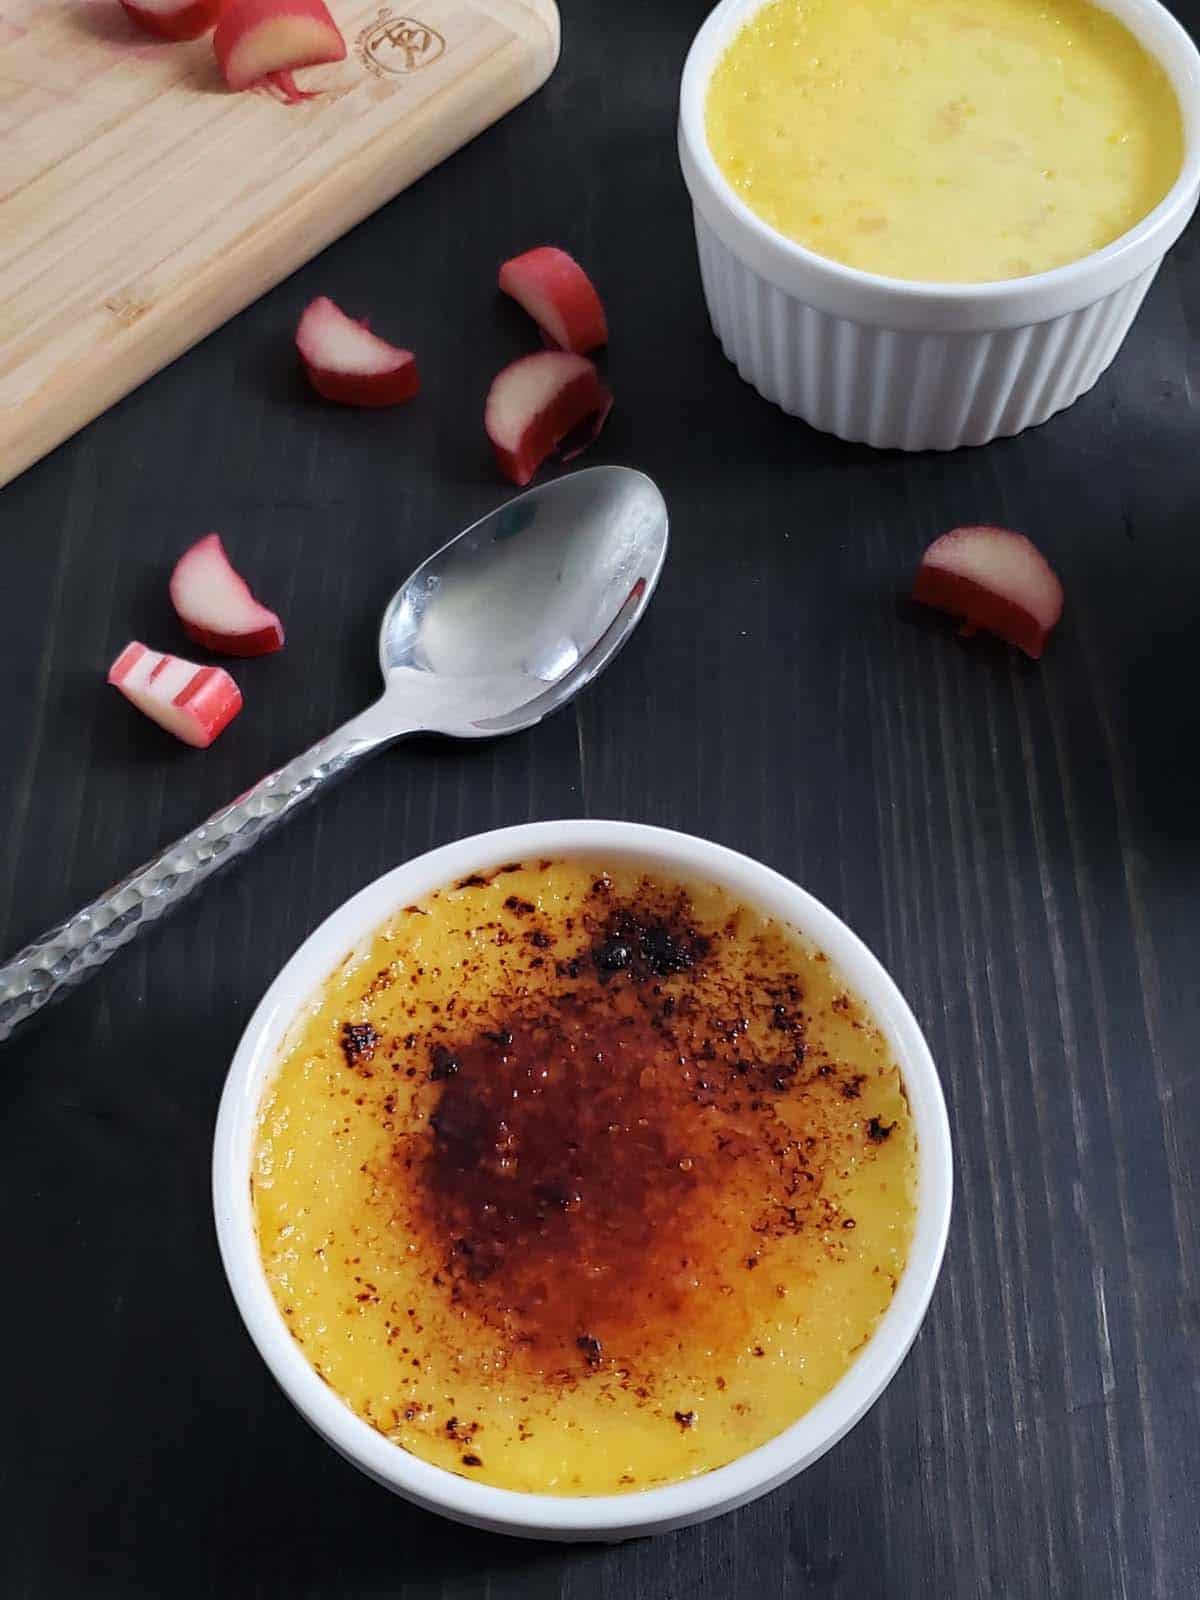 Rhubarb creme brulee on a dark background next to a spoon.